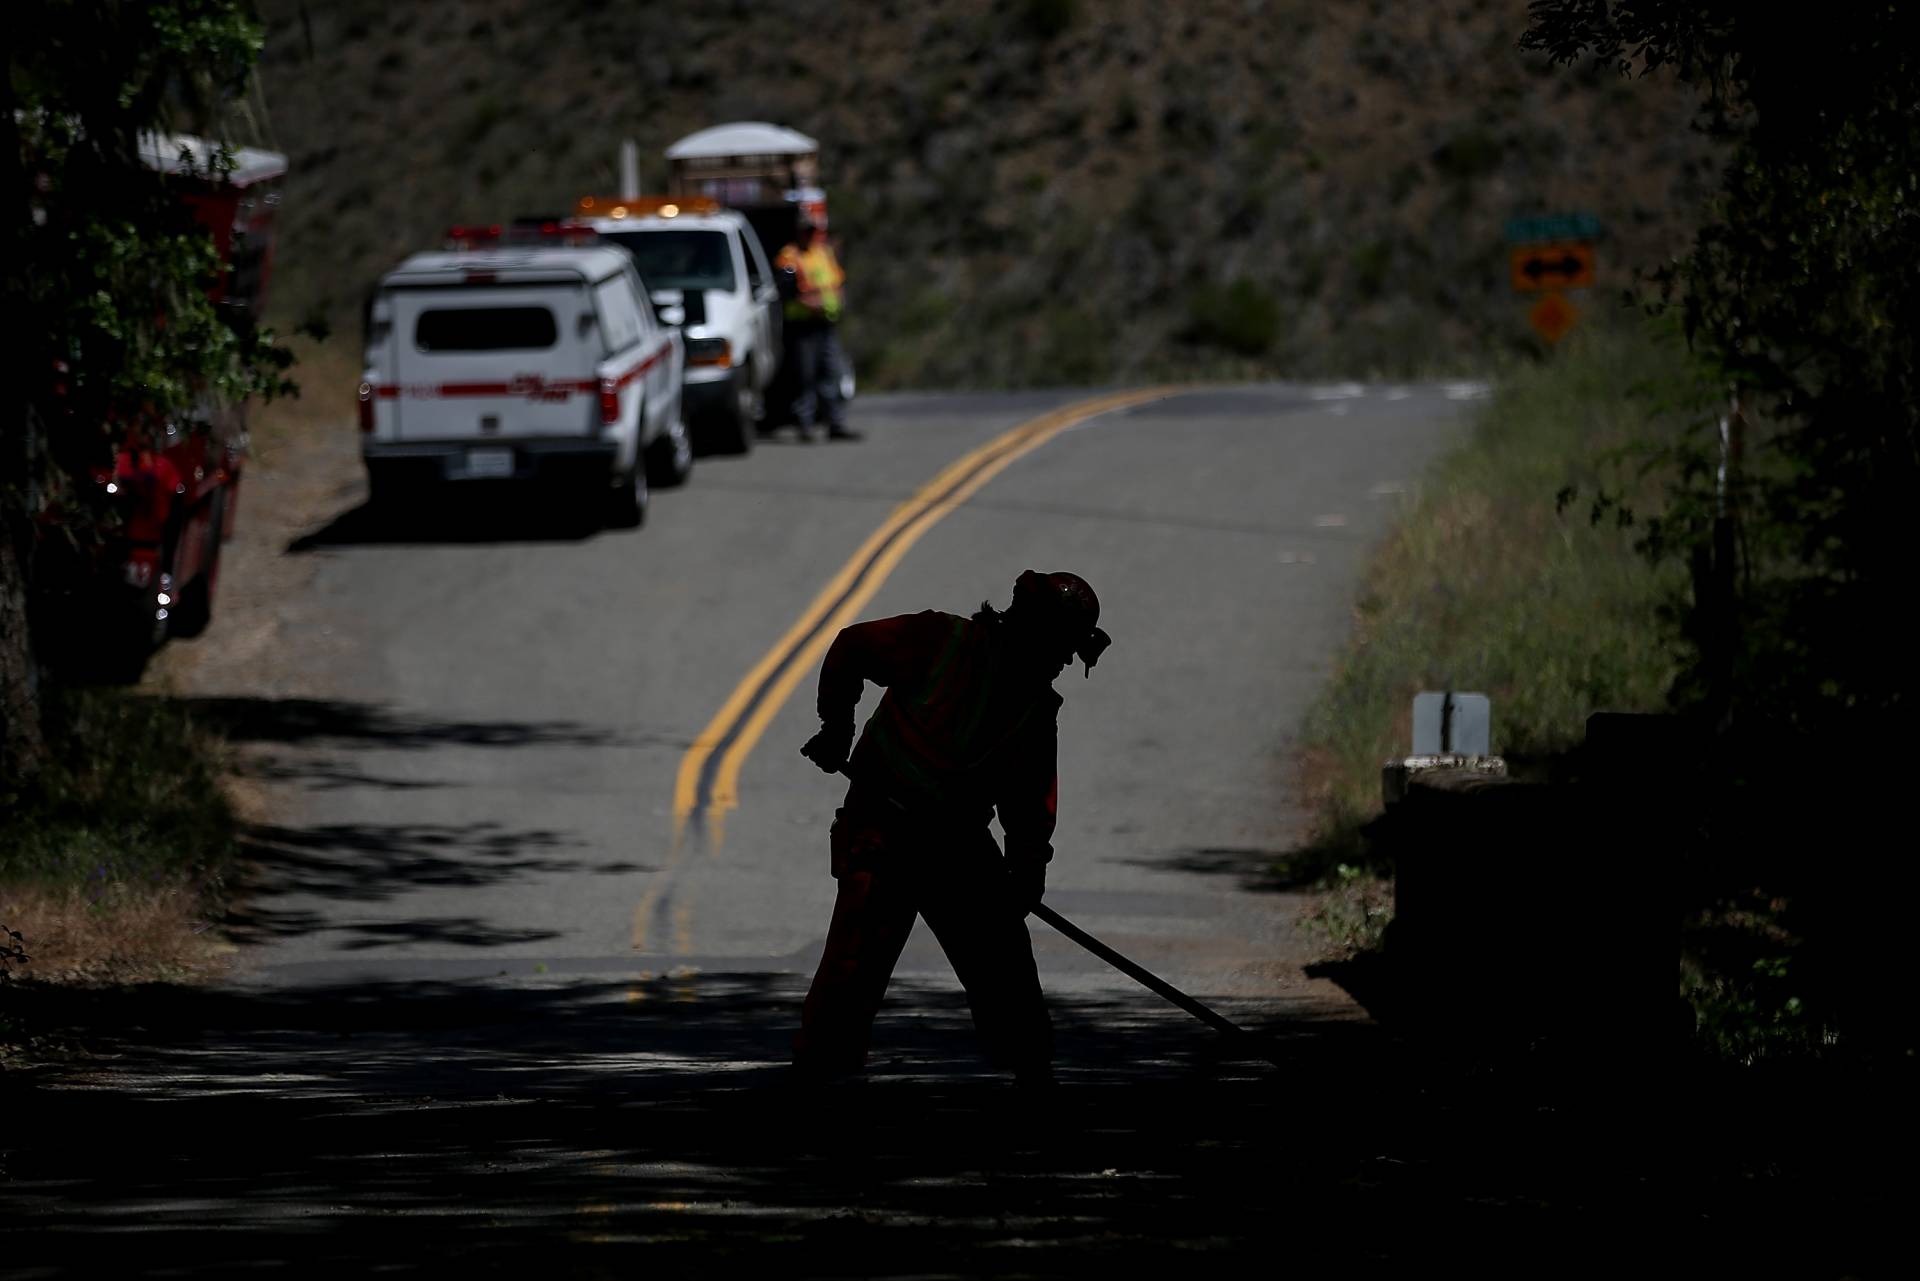 A fire crew sweeps the road to remove ground fuels and small trees along a road to help reduce the spread of fire in the event of a wildfire. Justin Sullivan/Getty Images